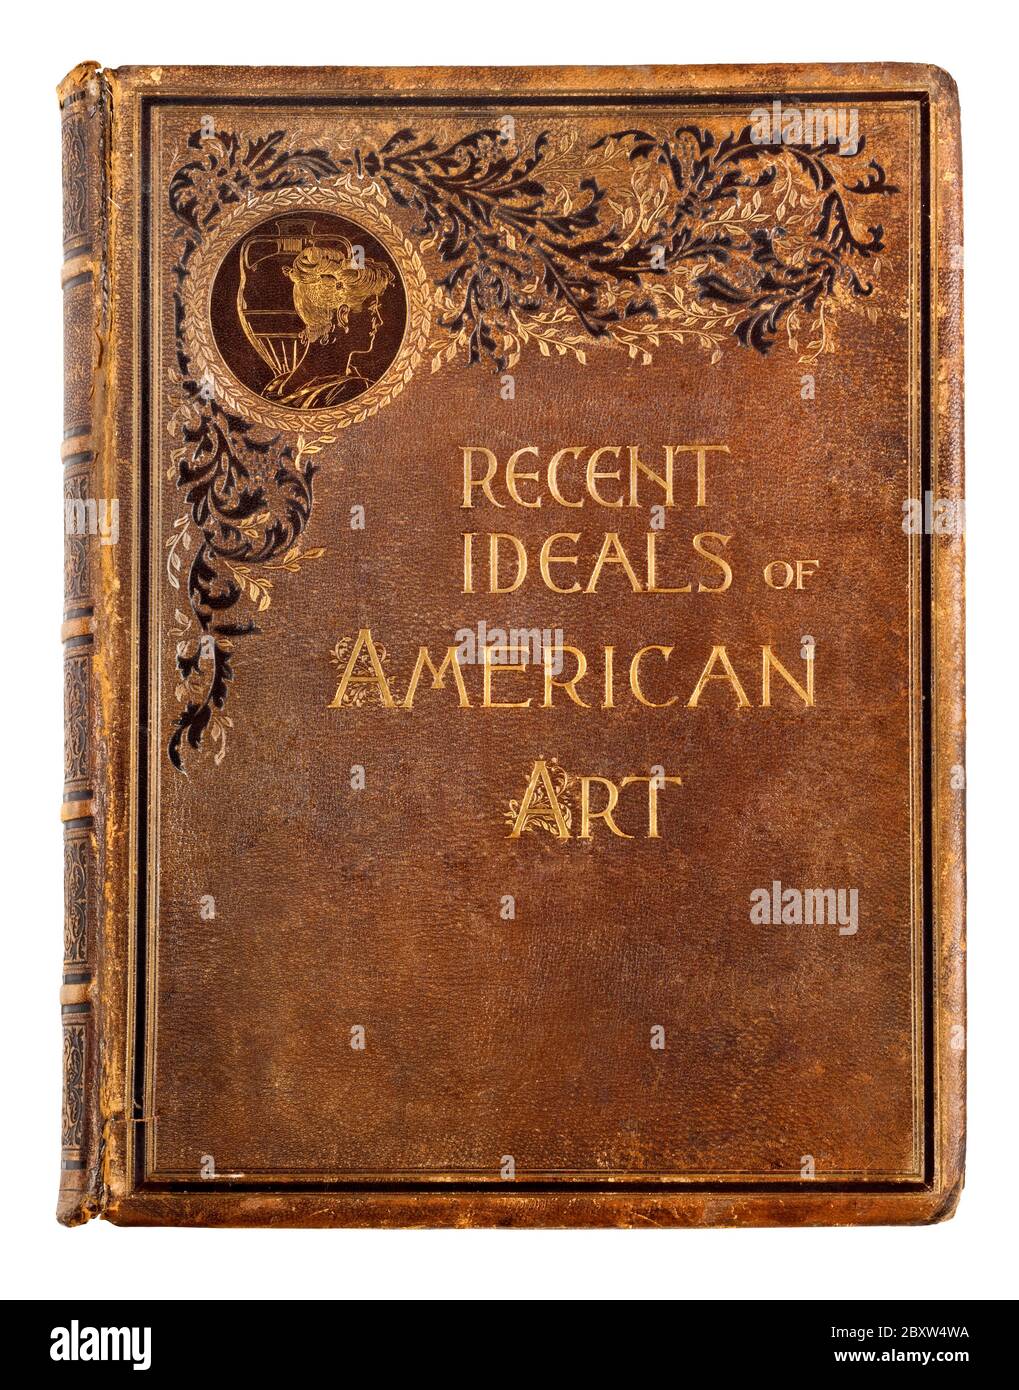 An 1890 hardbound leather cover of the published book Recent Ideals of American Art Stock Photo